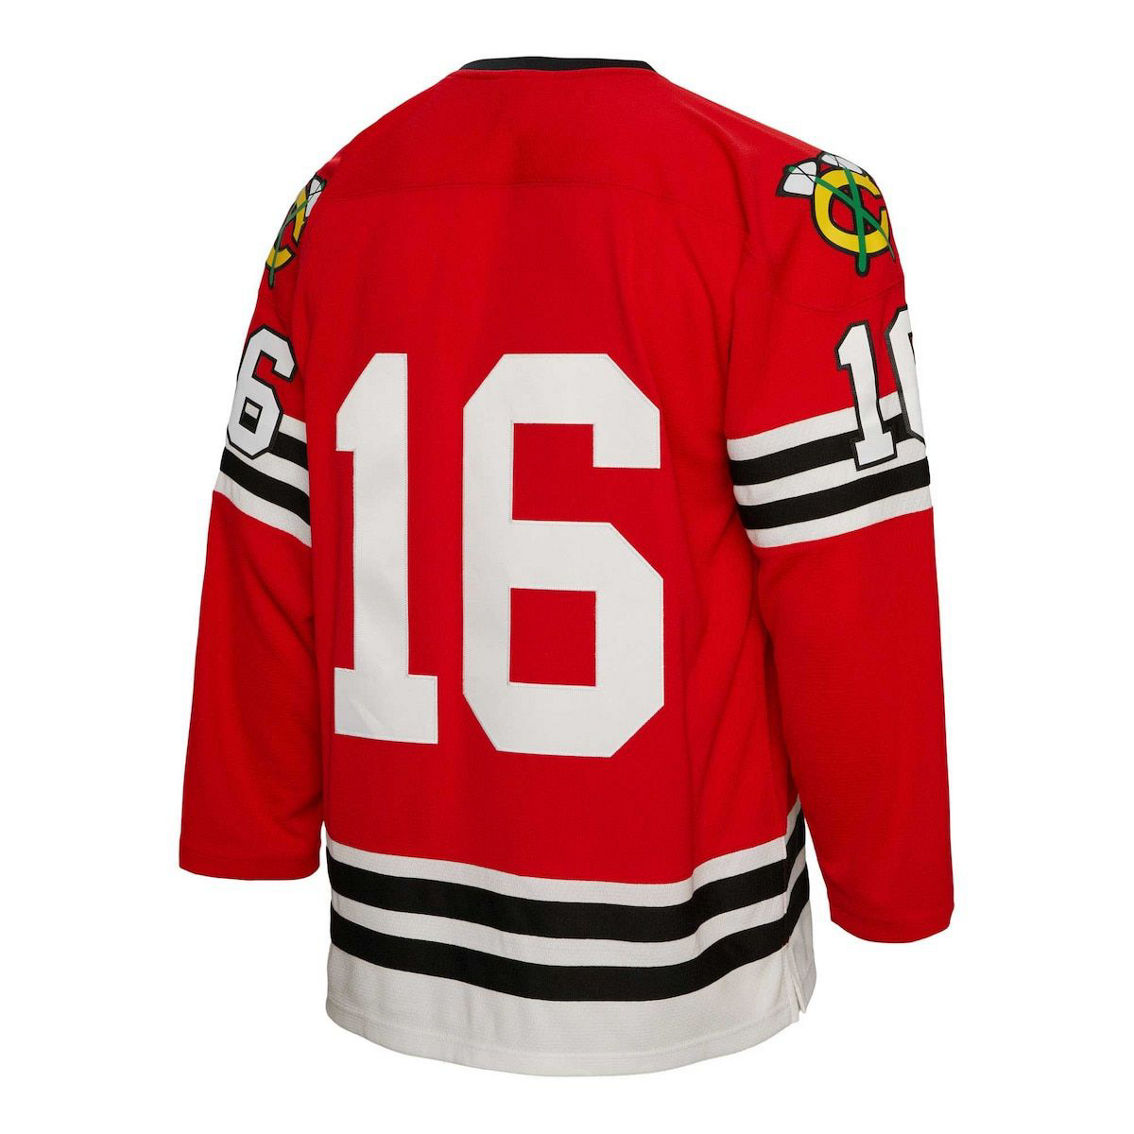 Mitchell & Ness Men's Bobby Hull Red Chicago Blackhawks 1960/61 Blue Line Player Jersey - Image 4 of 4